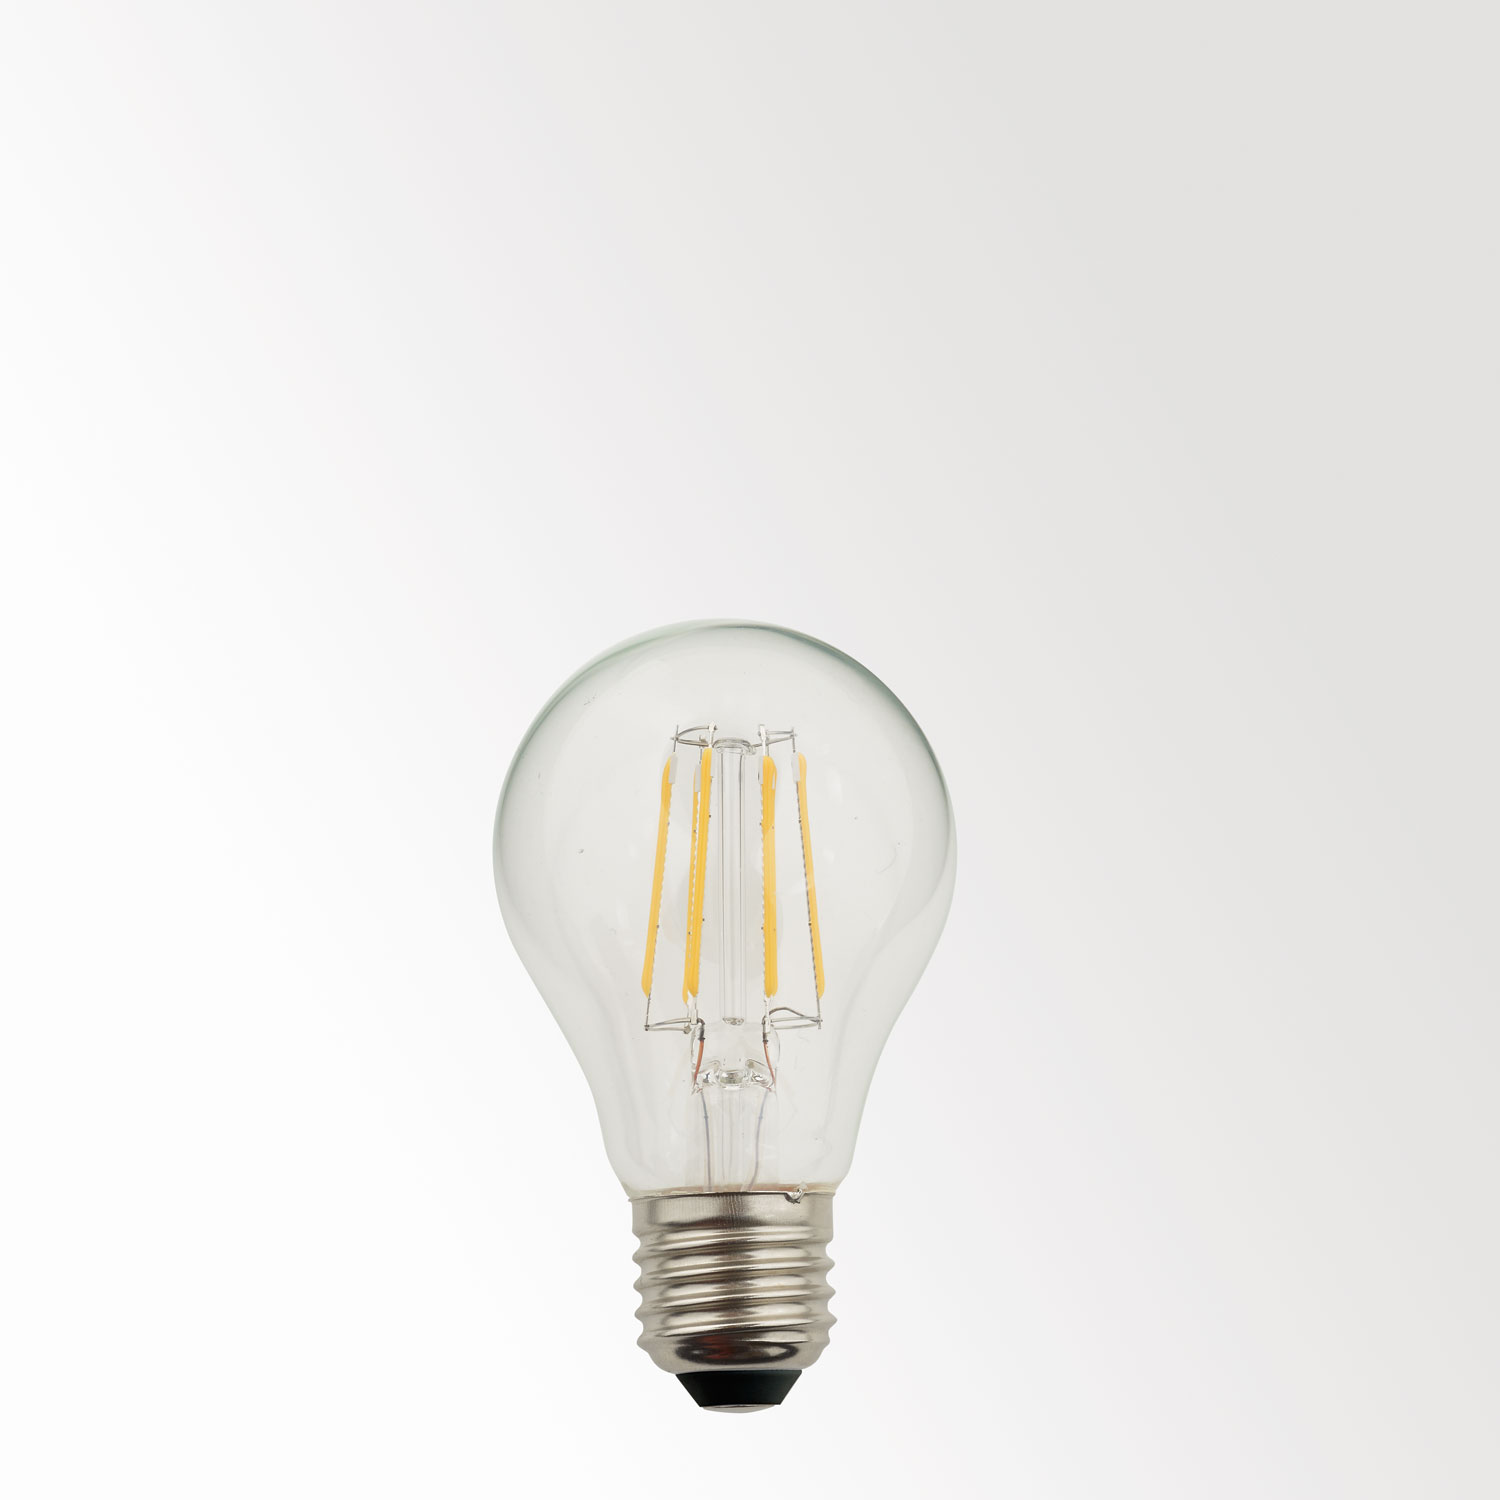 From there dialect team LED FILAMENT A60 E27 6W 2700K - Products - Delta Light